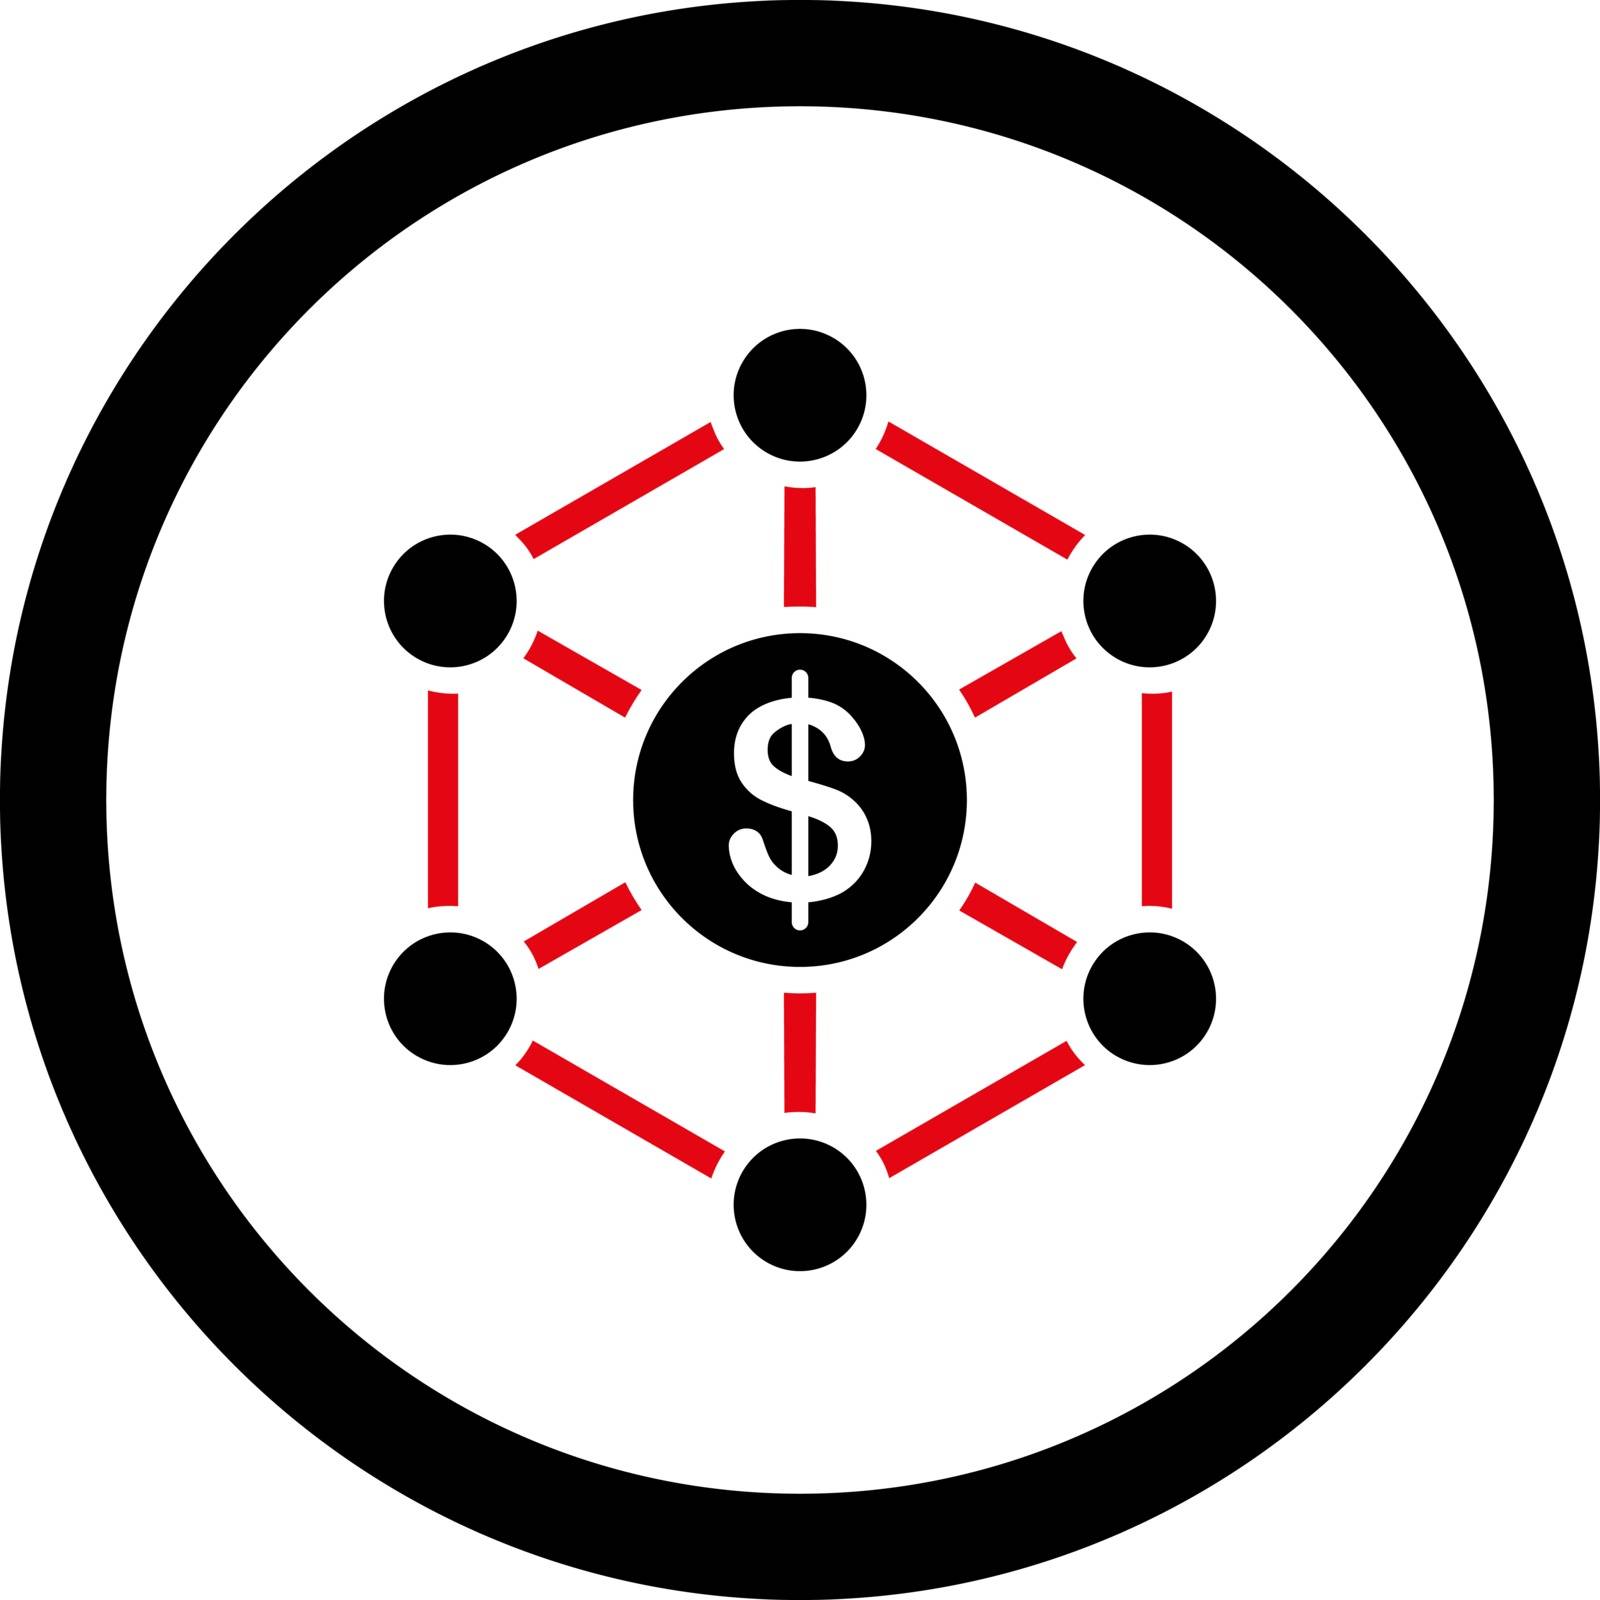 Scheme vector icon. This flat rounded symbol uses intensive red and black colors and isolated on a white background.